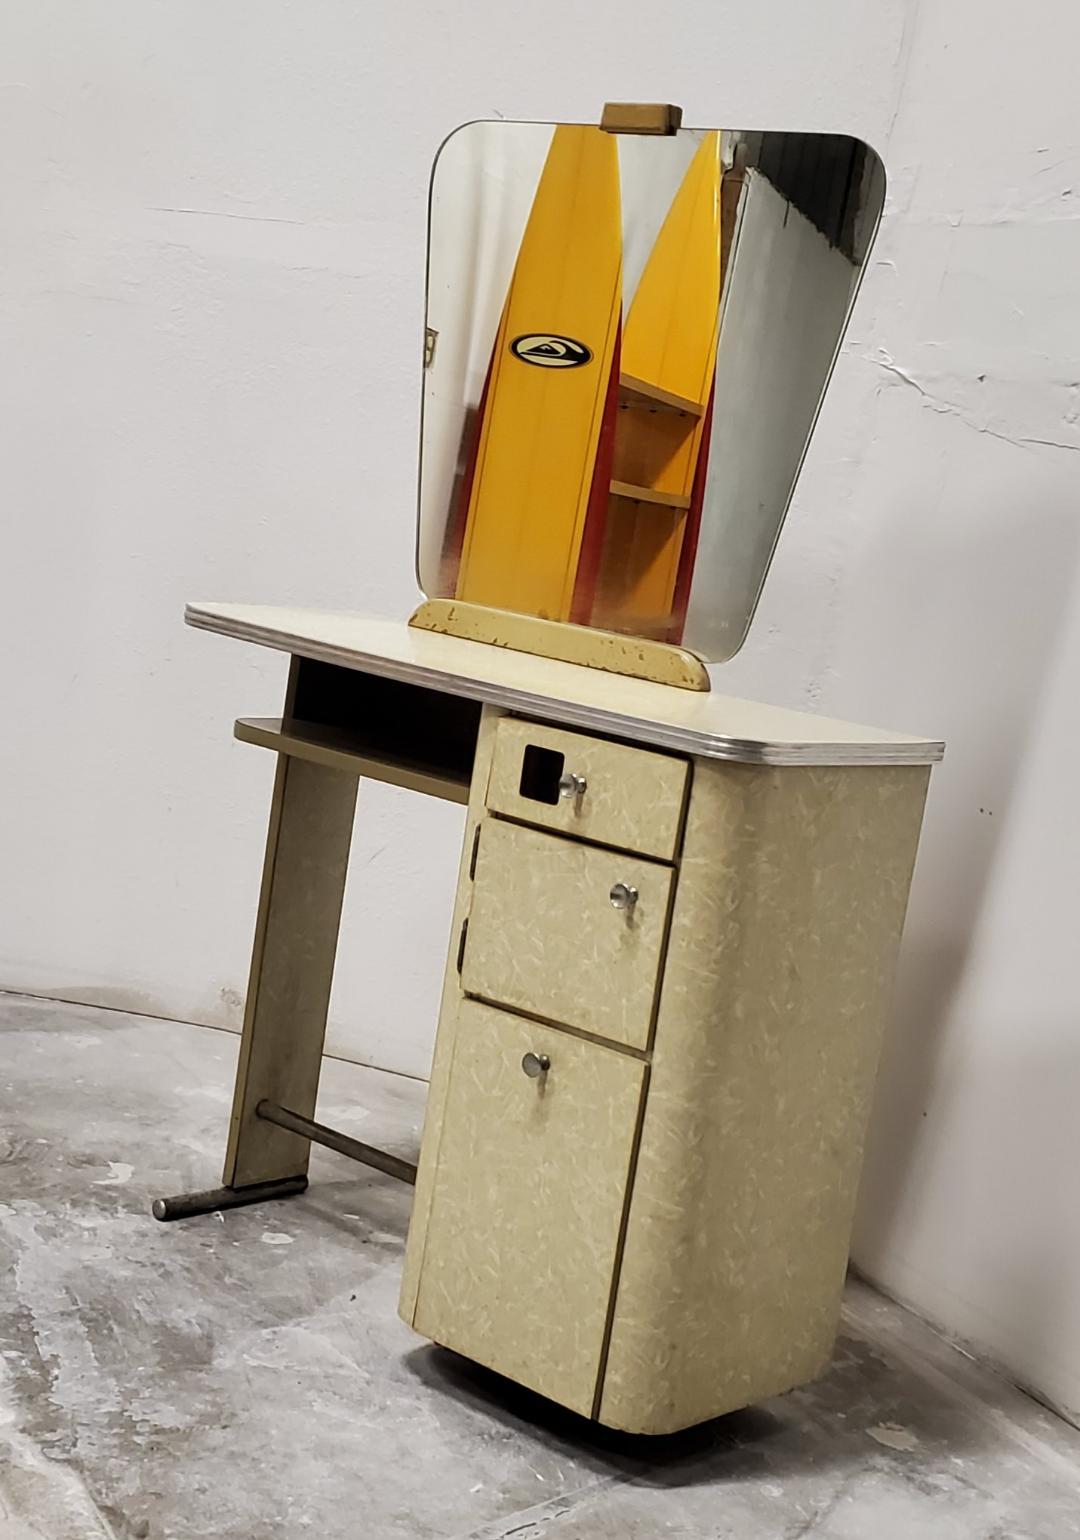 1950s Free Standing Beauty Salon Styling Station with Mirror Vanity Hair Salon In Good Condition For Sale In Monrovia, CA